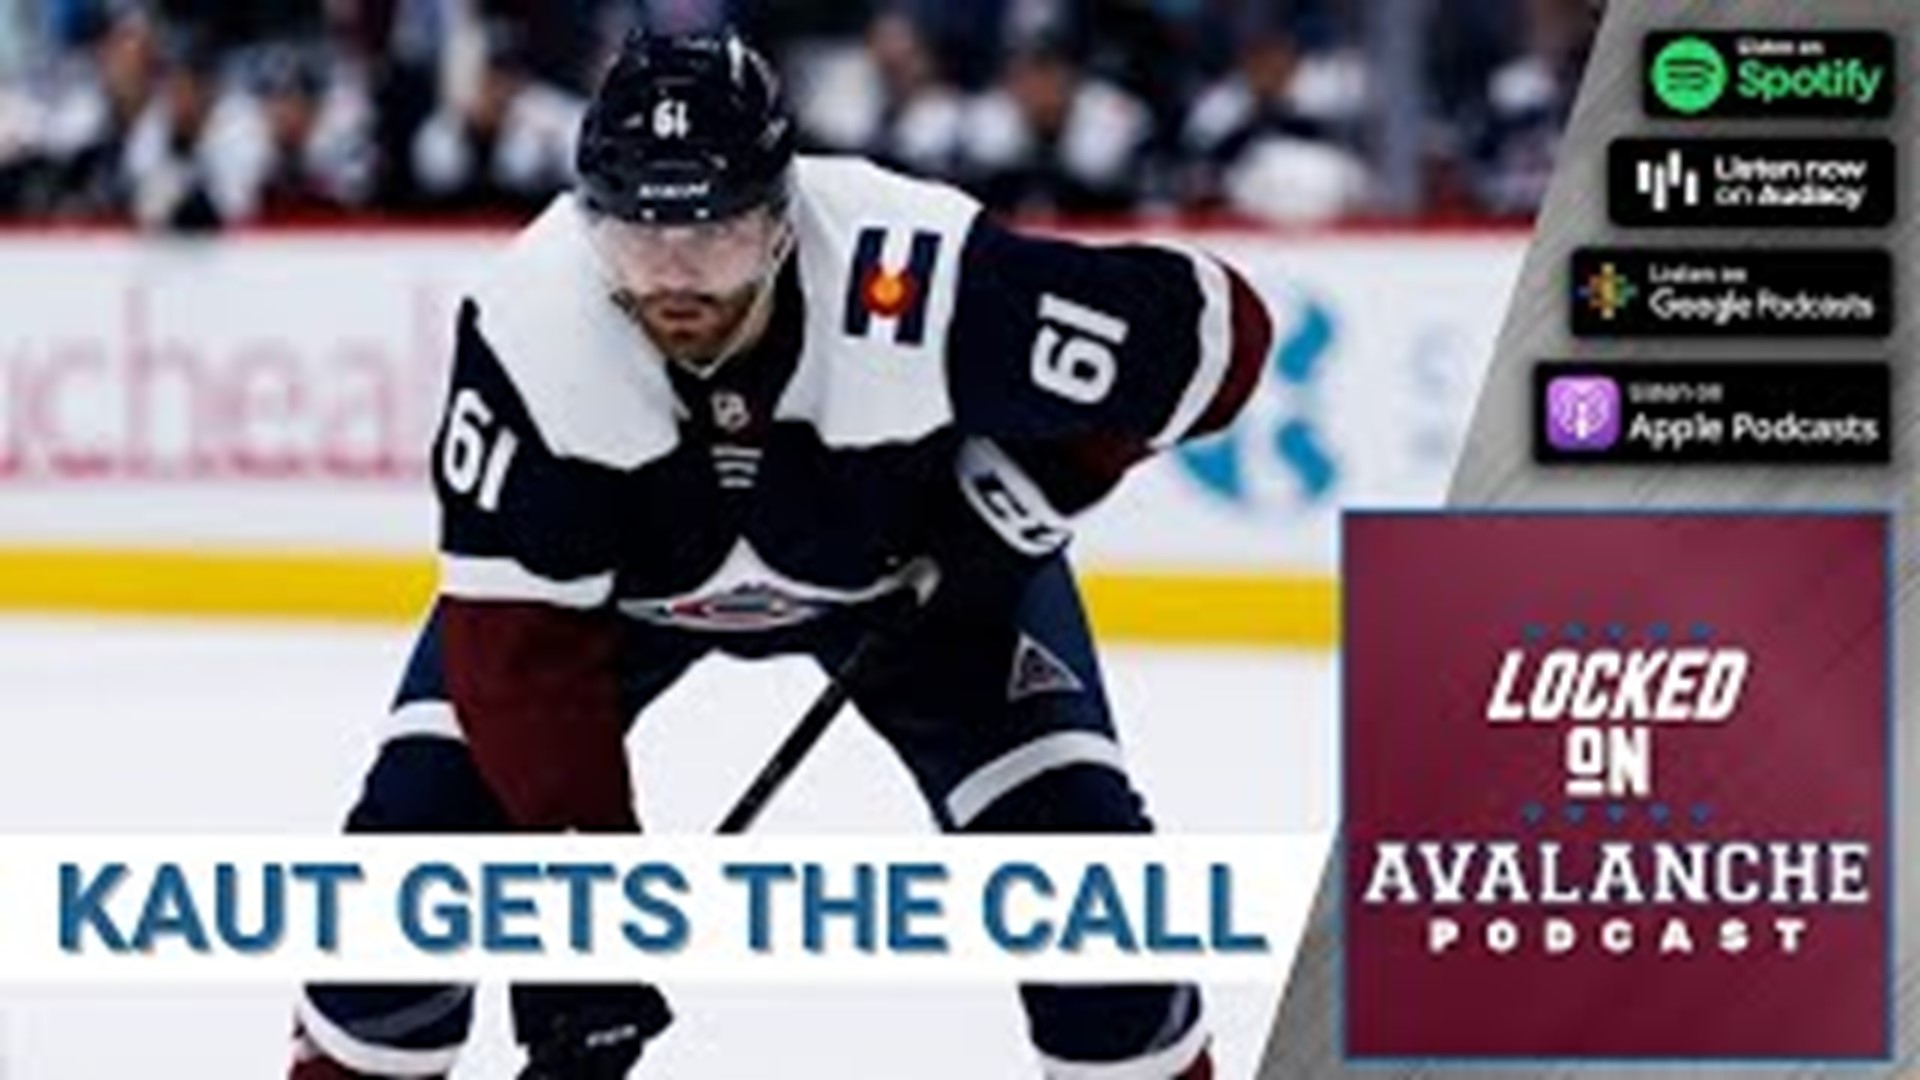 The season might be in it's early stages, but the Avalanche are not waiting around to make some changes.